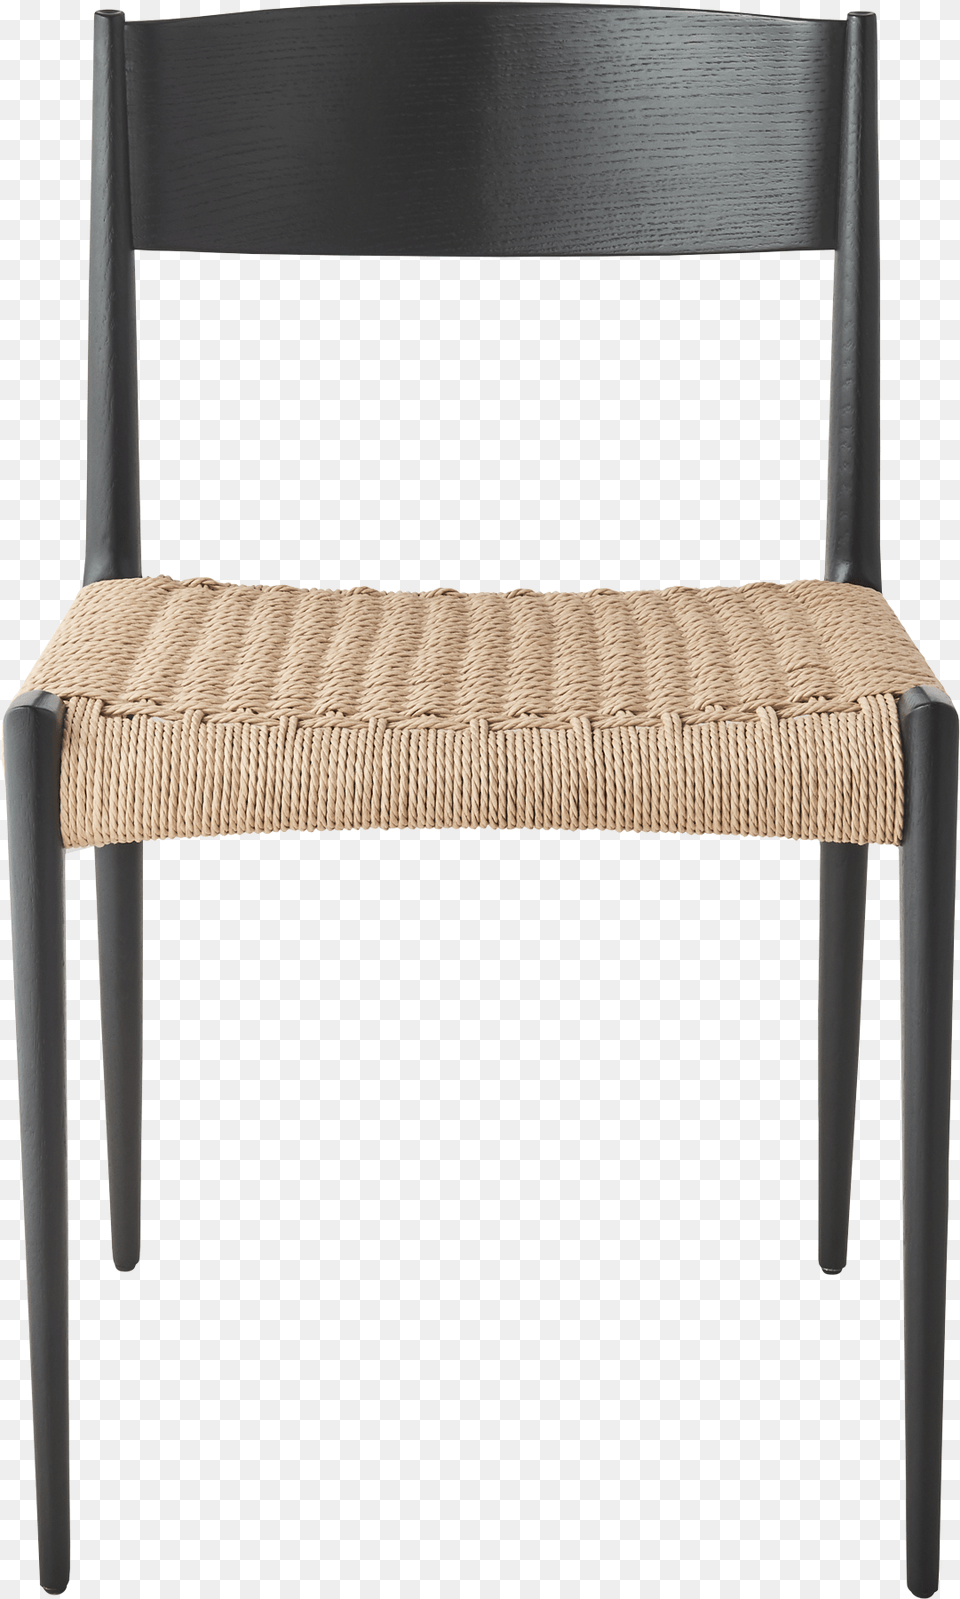 Pia Chair Chair, Furniture Free Transparent Png